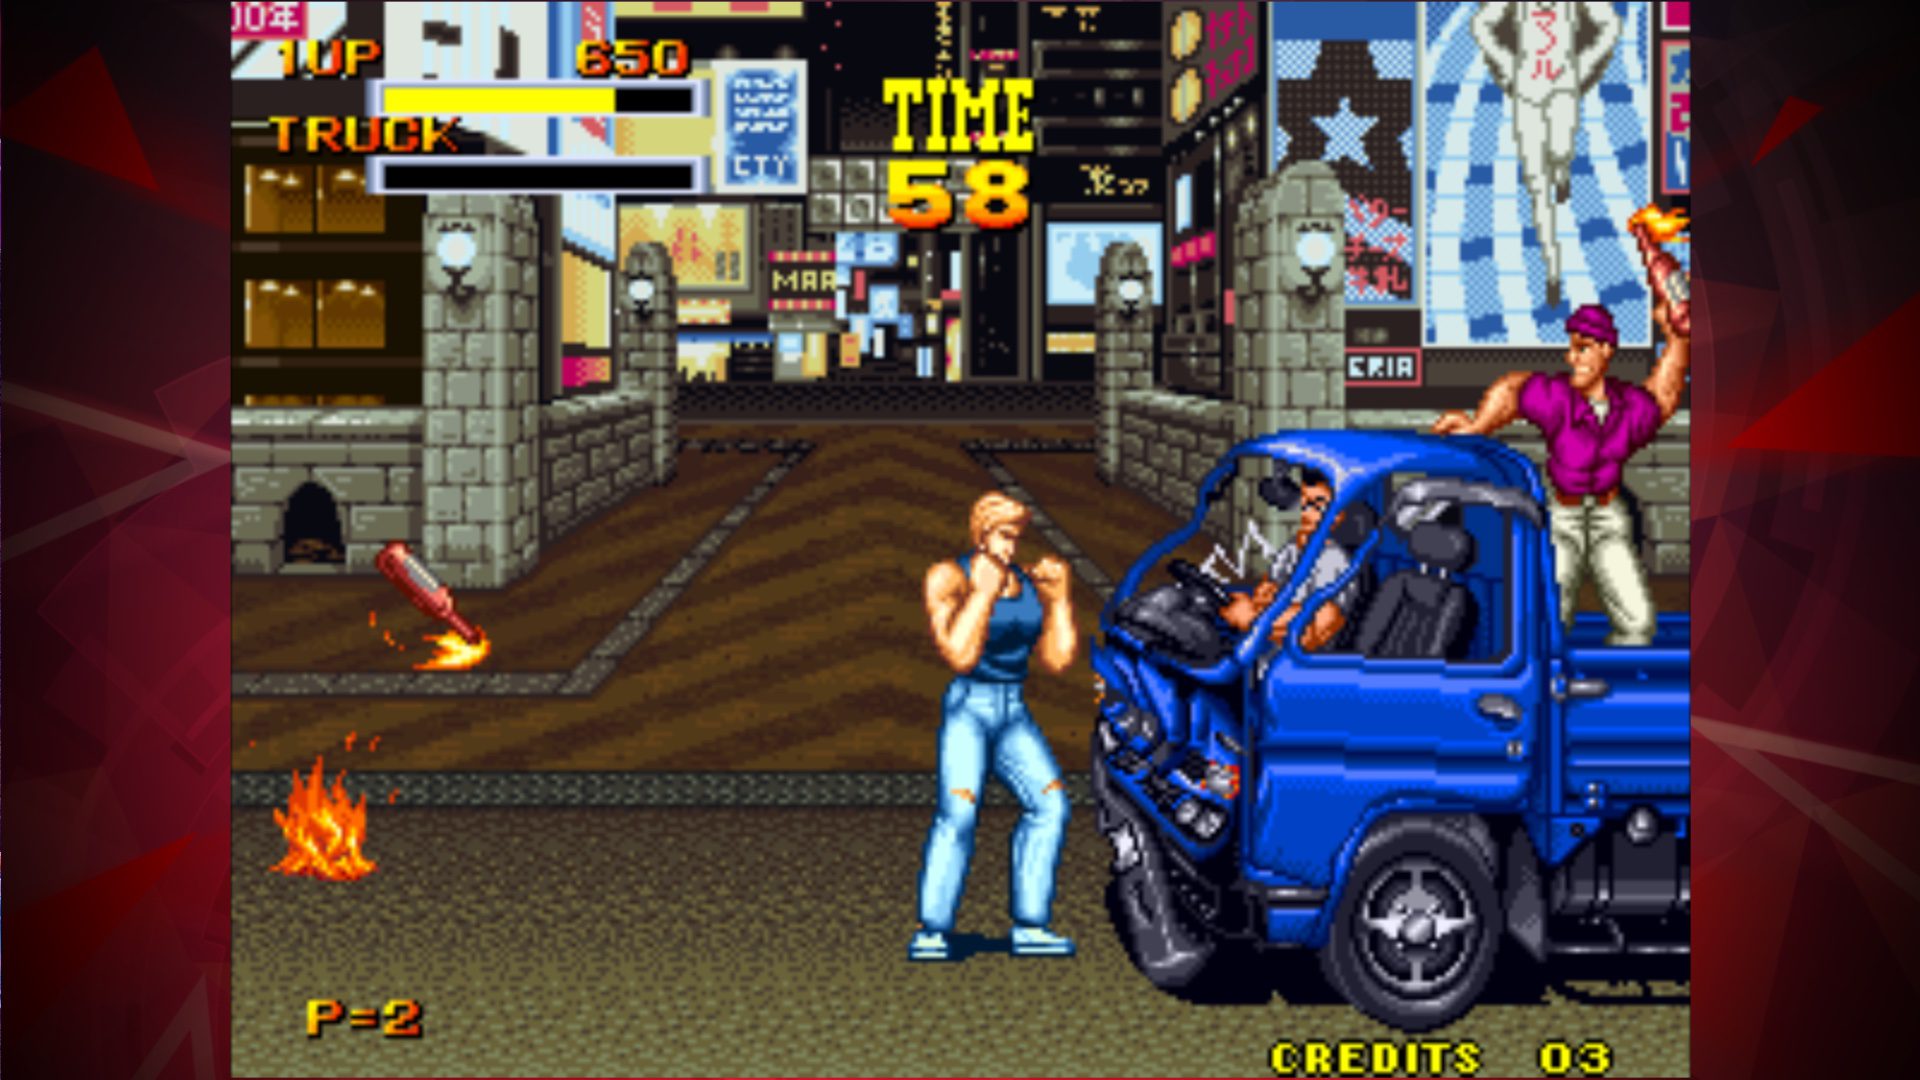 Neo Geo Game For PC Full Version